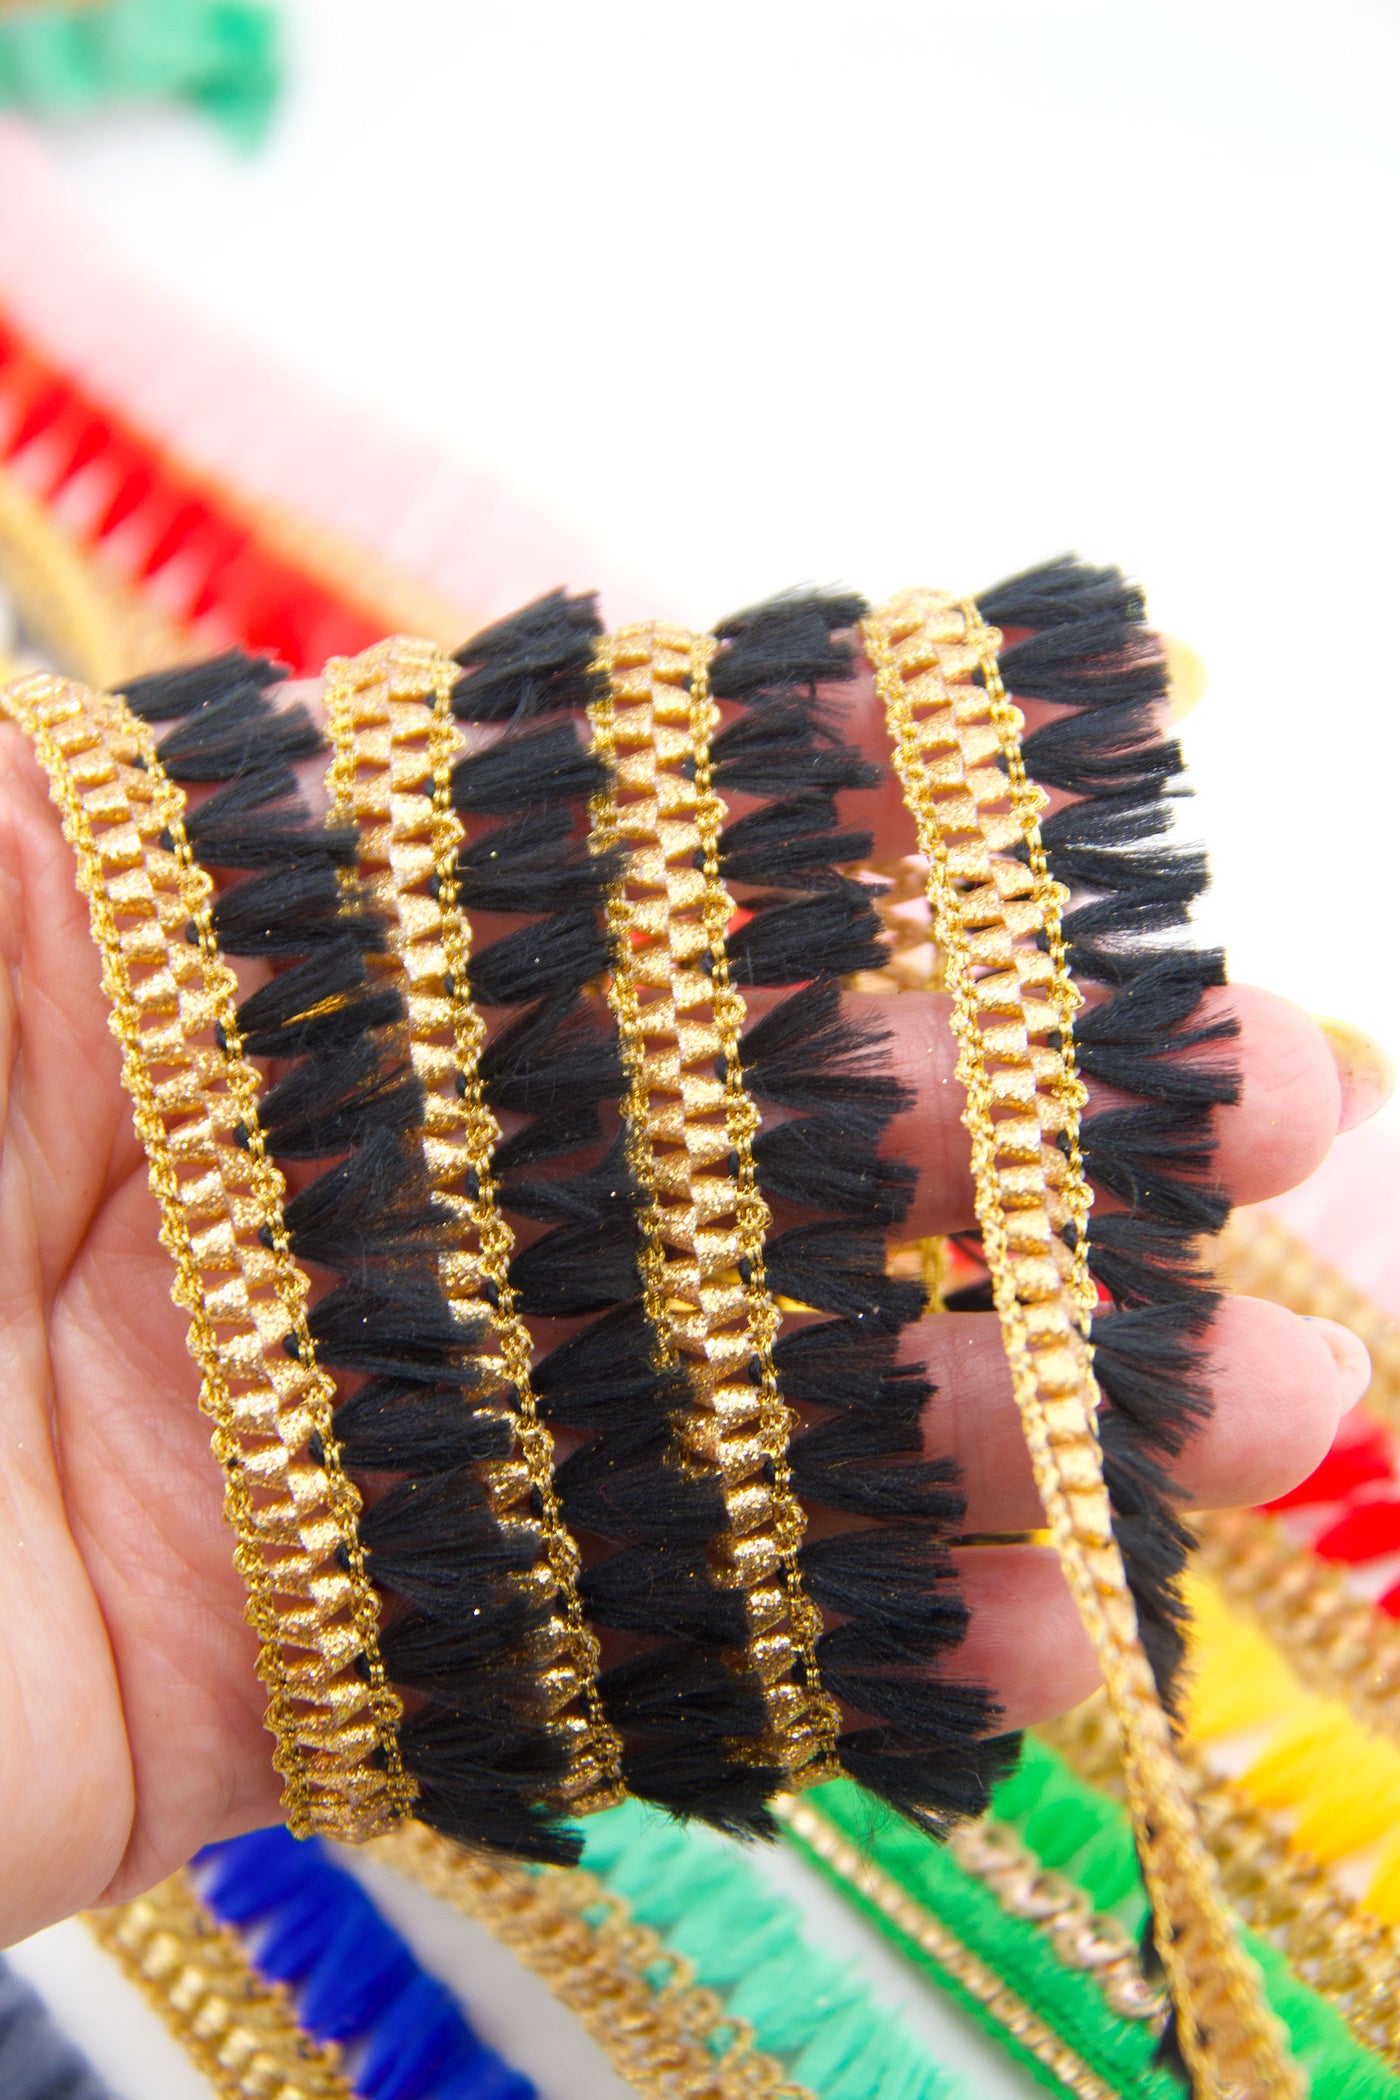 Black Skinny Indian Ribbon, Holiday Craft or Jewelry Supplies, Tassels and trim, all in one